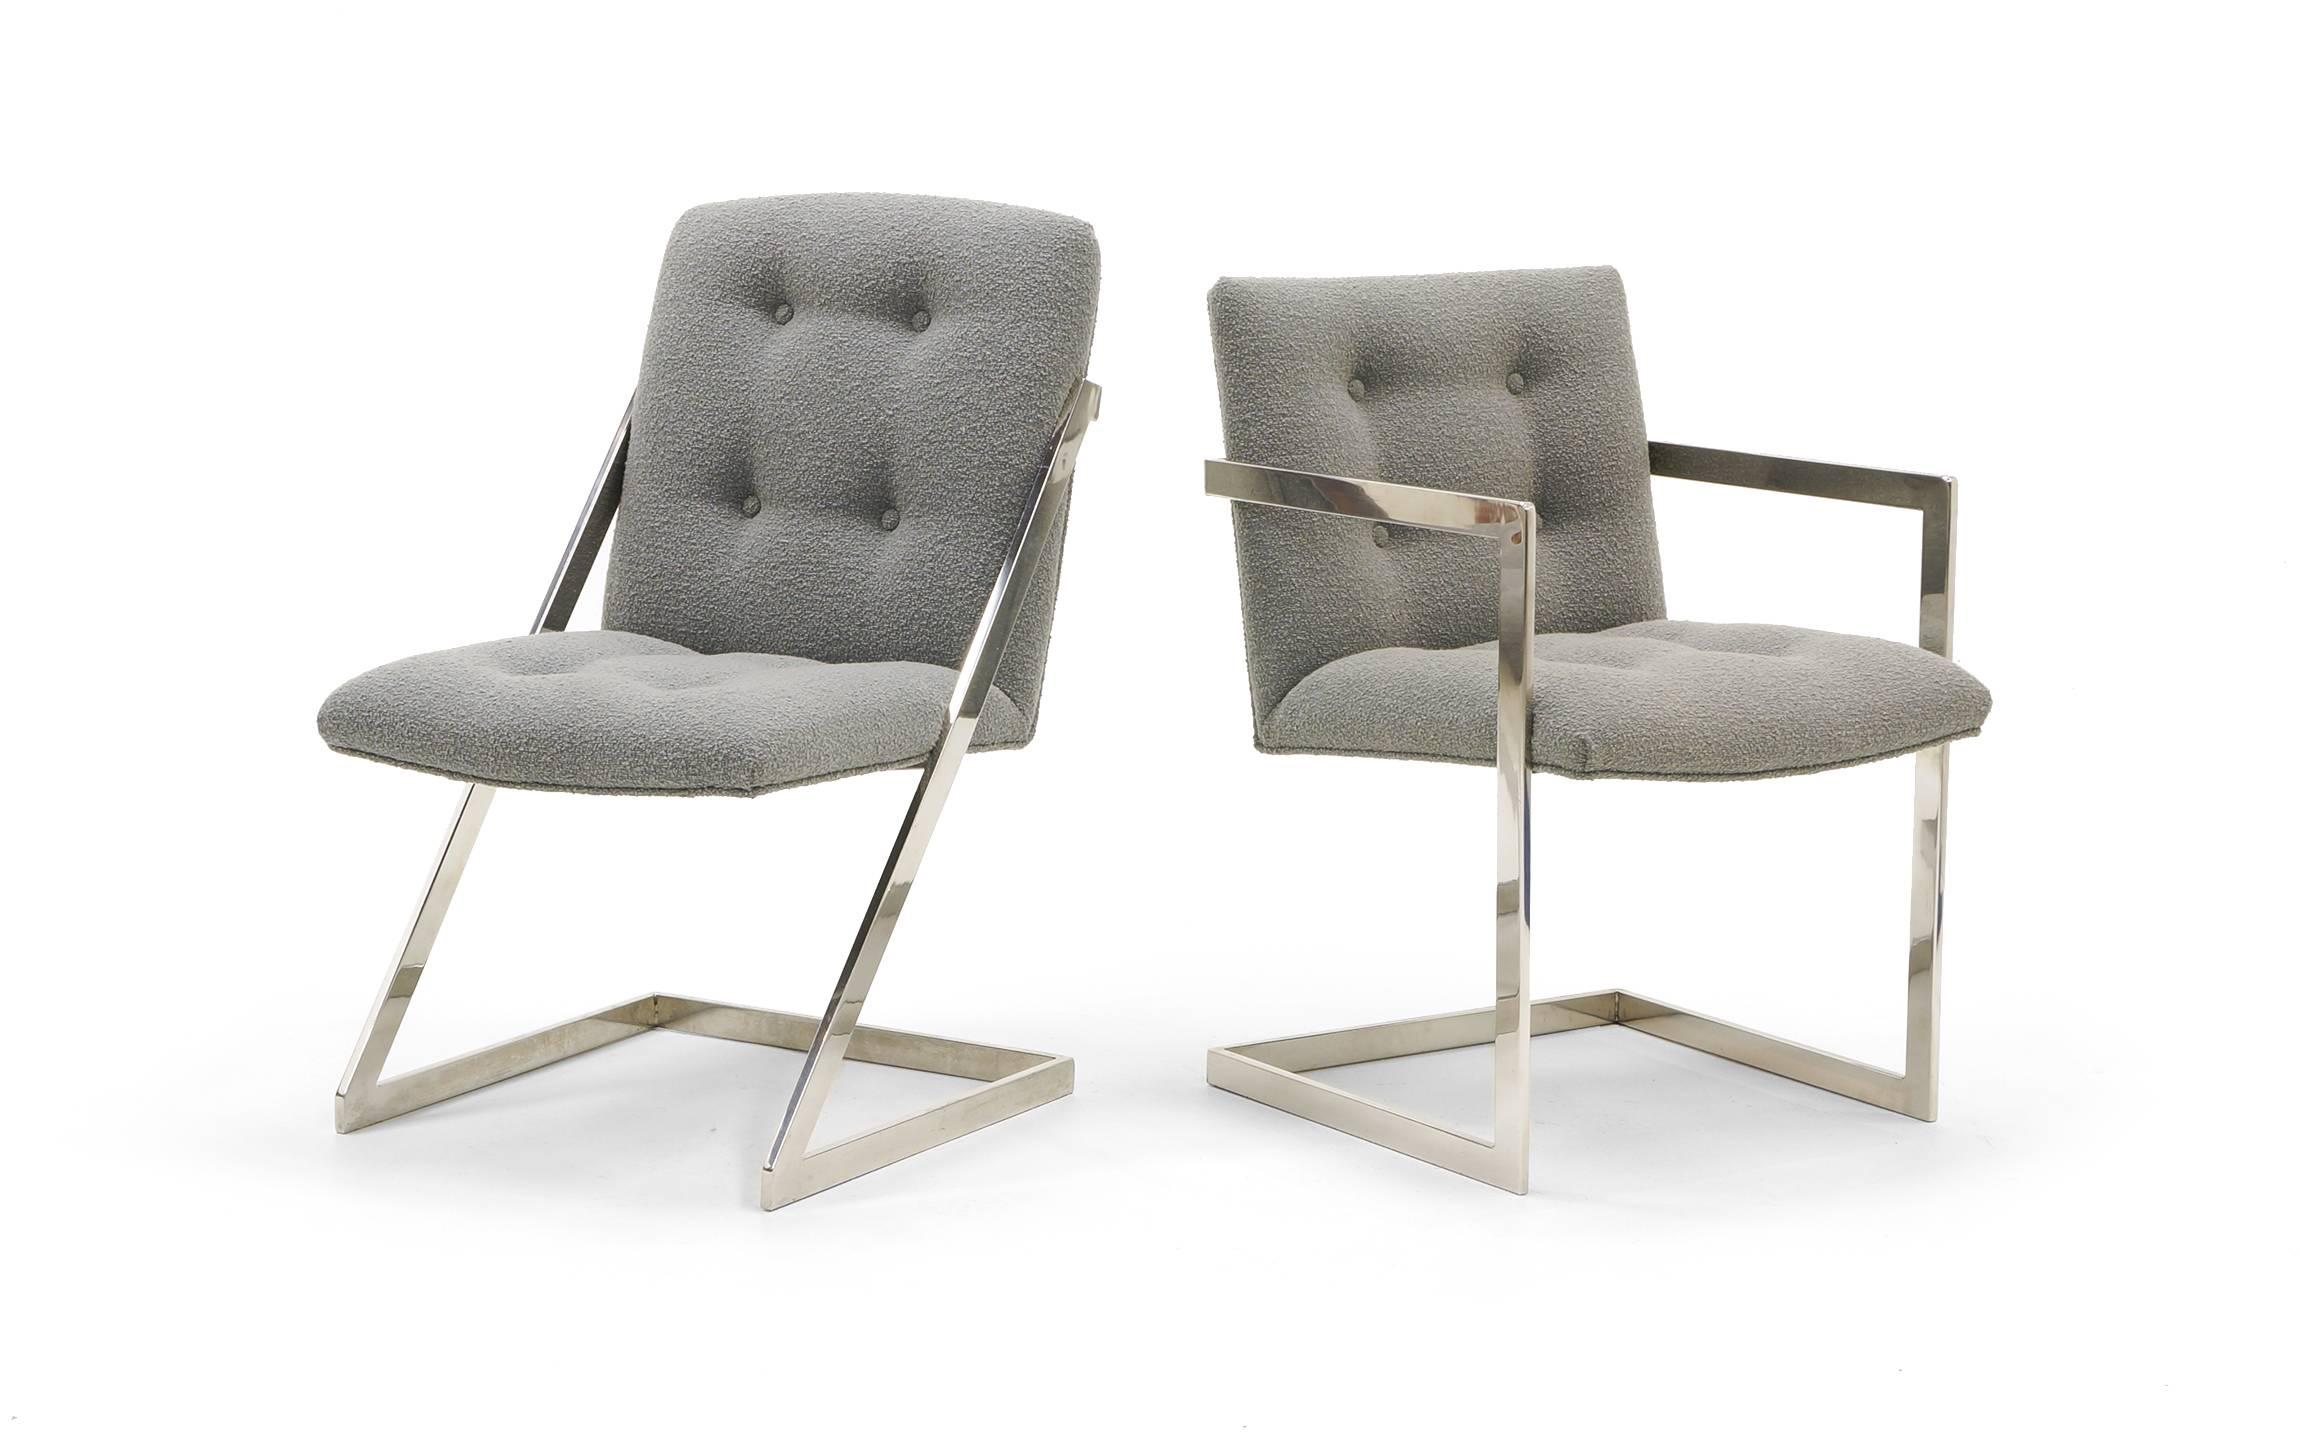 Set of six dining chairs designed by Milo Baughman for Design Institute of America. Four side chairs with Z profile chromed steel frames and two arm chairs. Reupholstered in a medium gray Knoll Classic Boucle. New foam as well
Armchair